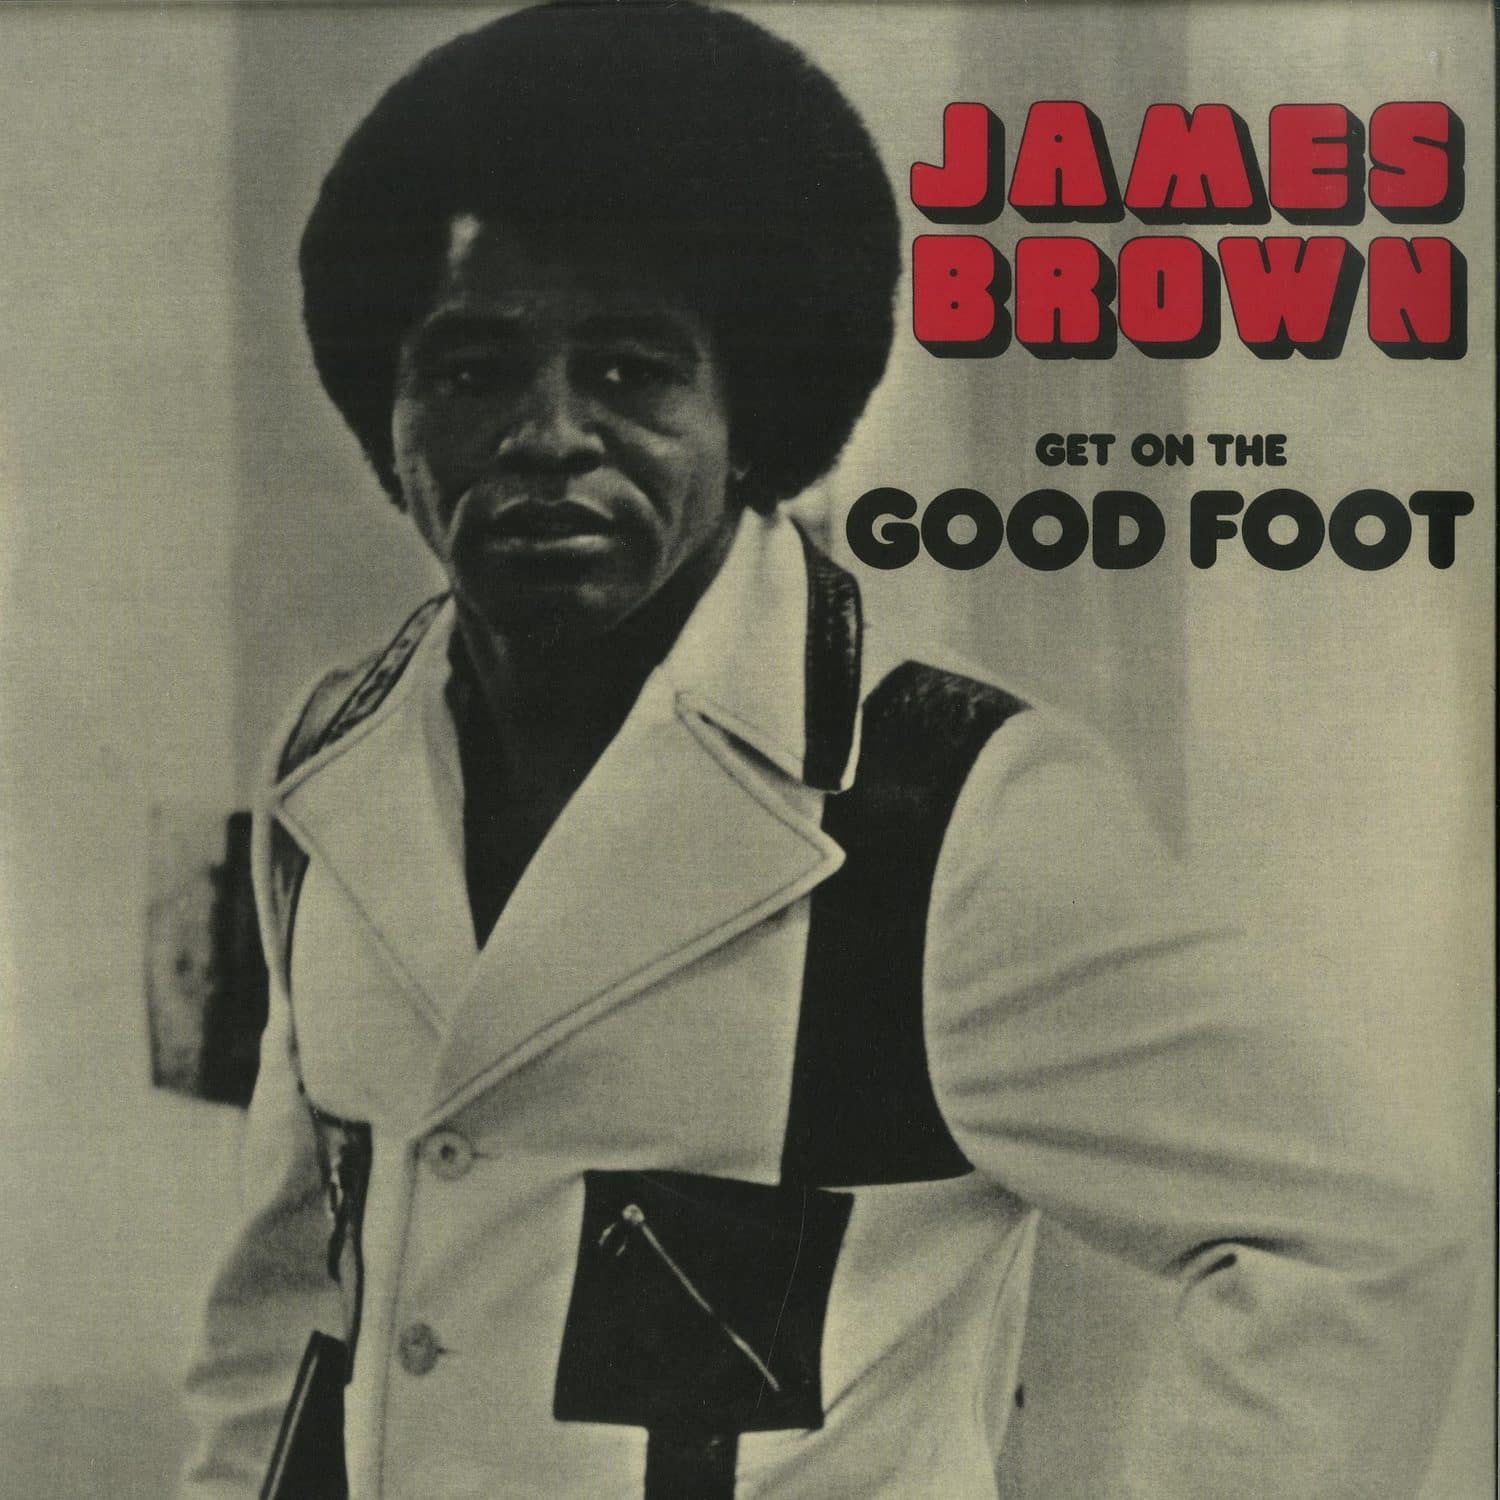 James Brown - GET ON THE GOOD FOOT 